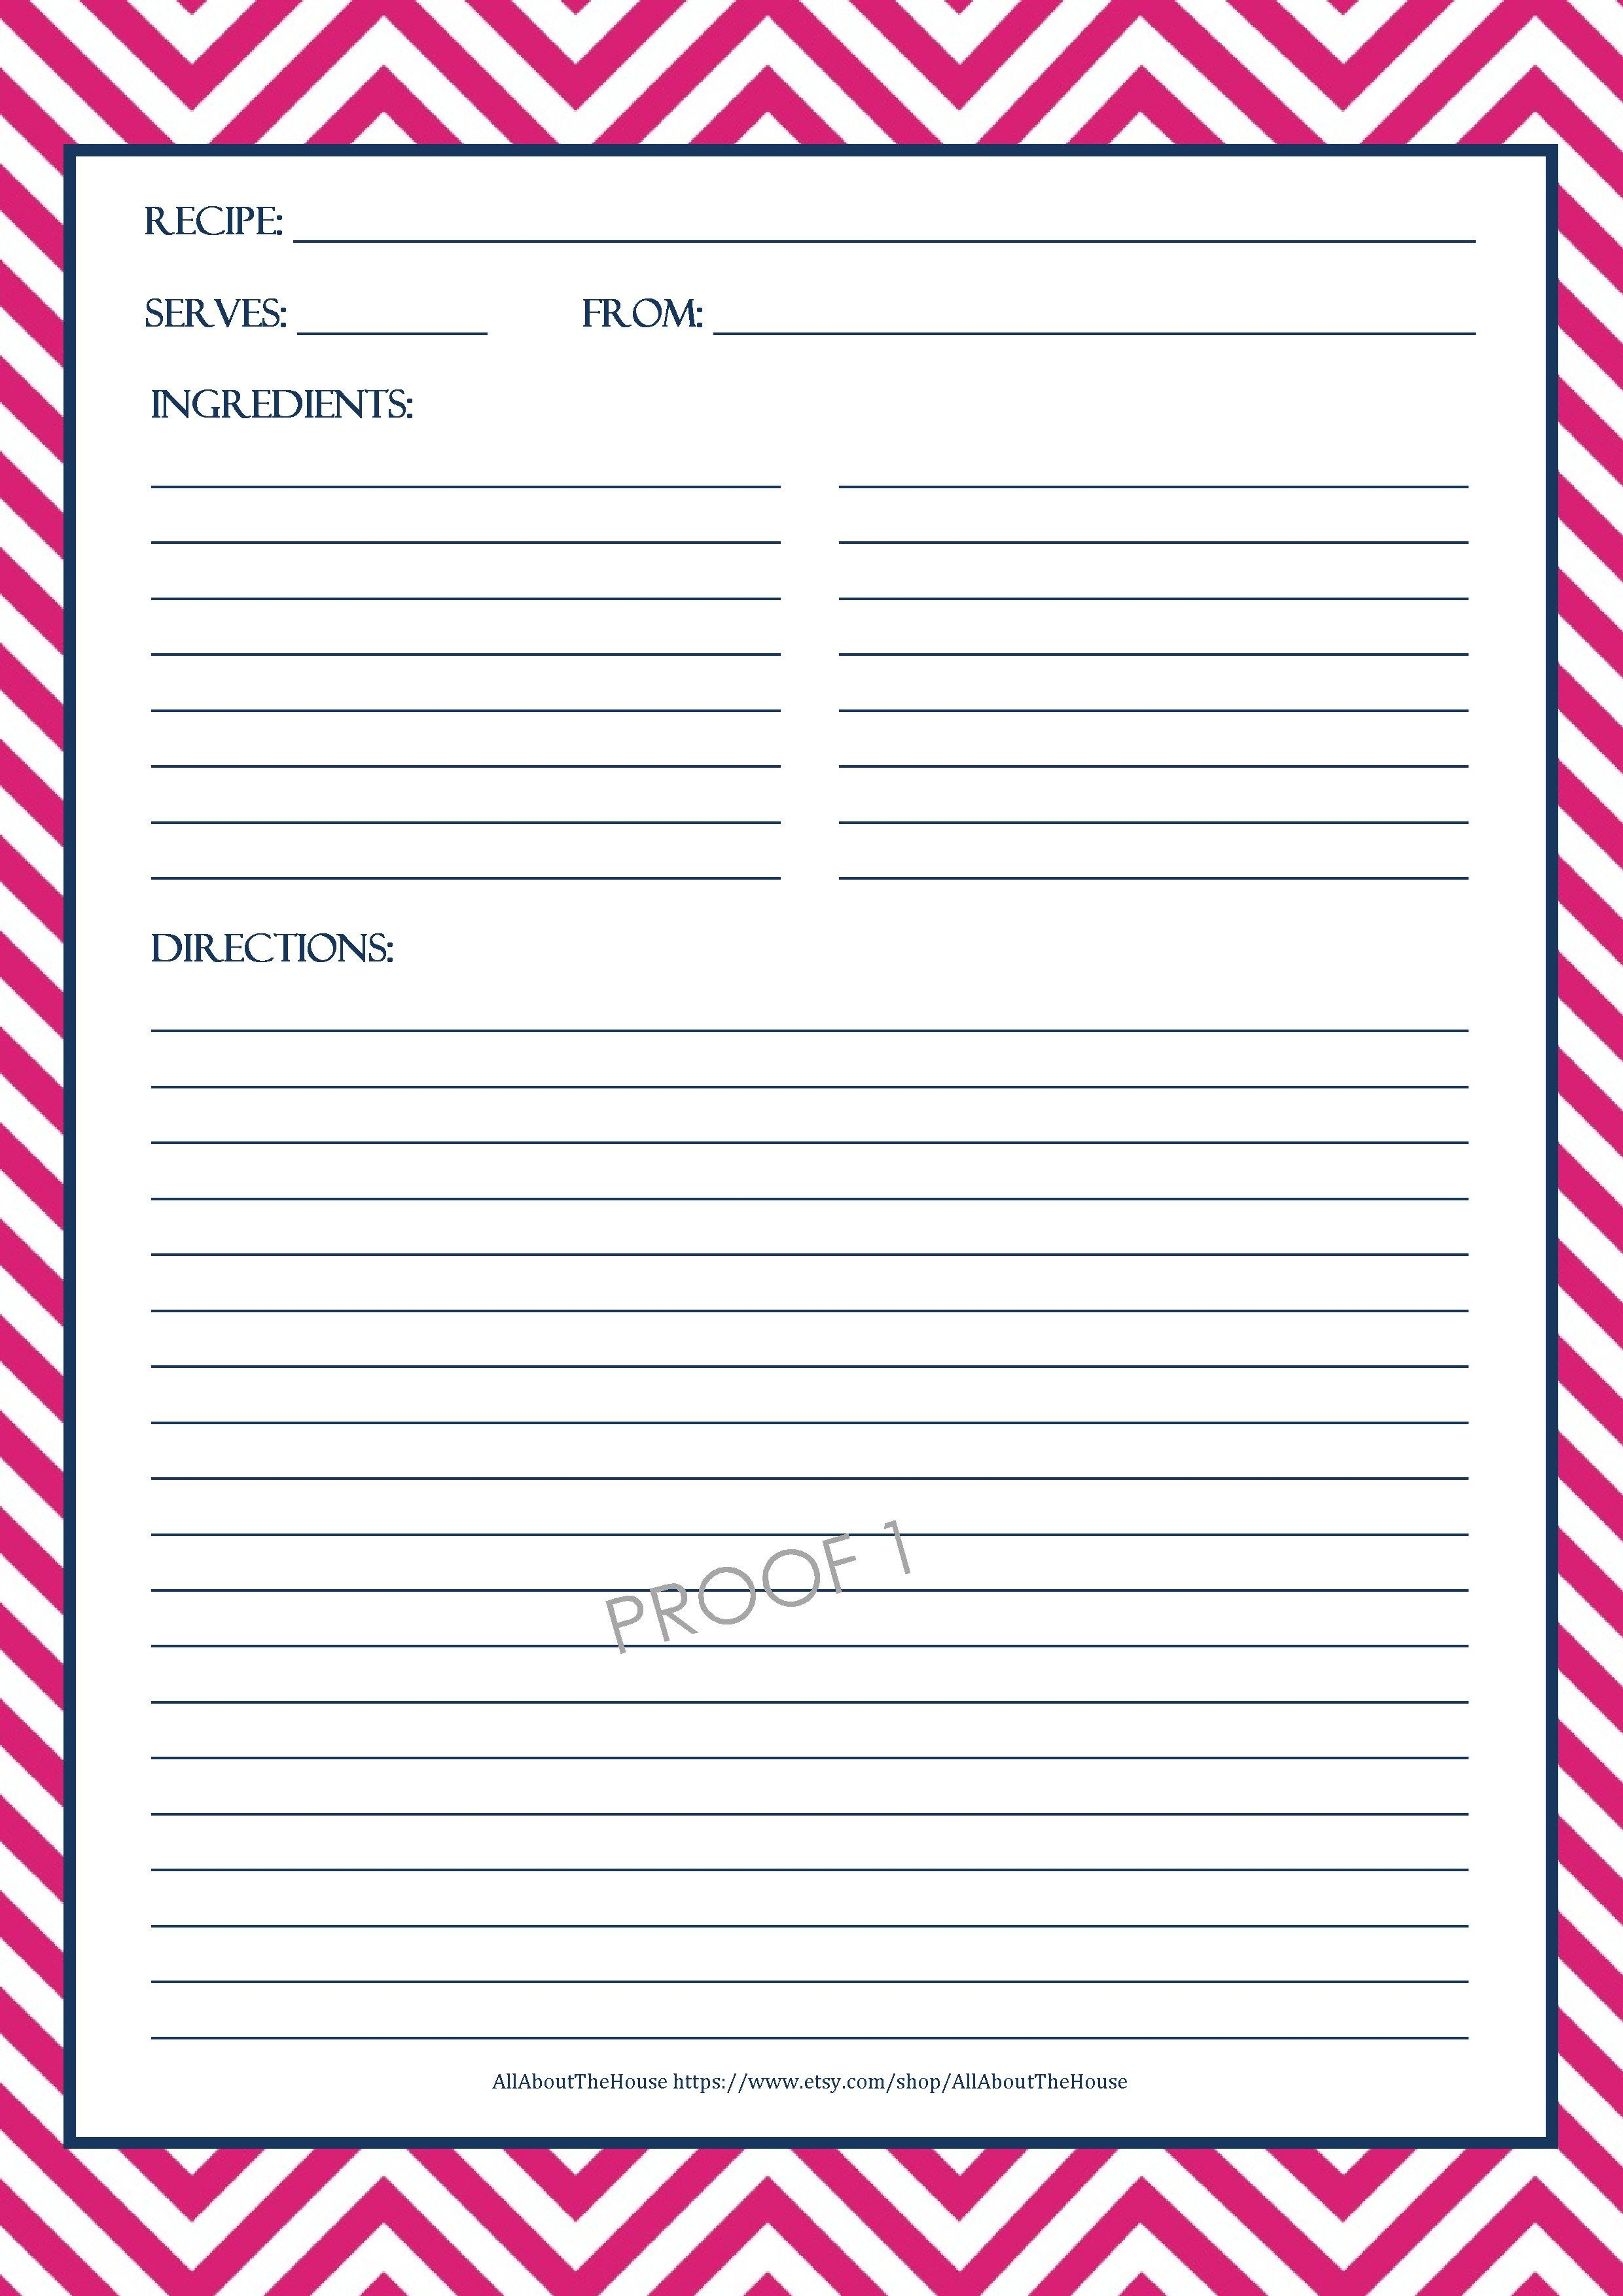 Chevron Recipe Sheet Editable  School Binder Wallpaper  Printable intended for Full Page Recipe Template For Word